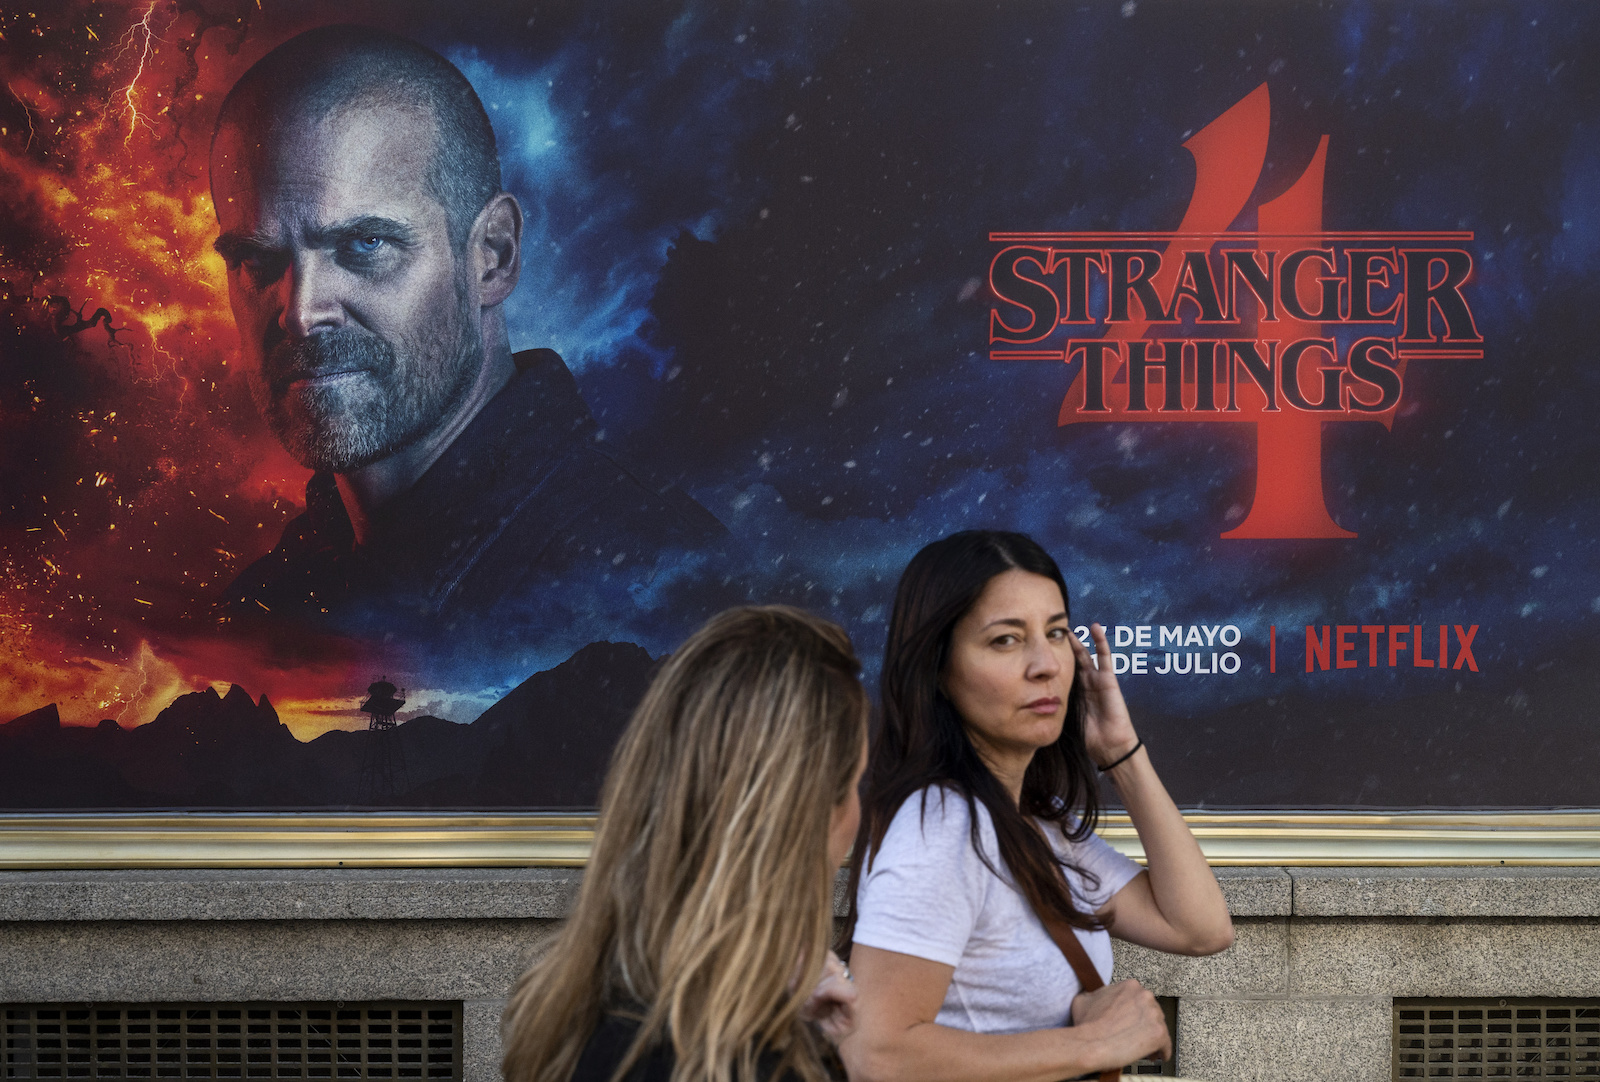 MADRID, SPAIN - 2022/05/27: Pedestrians walk past a street commercial advertisement banner from the American global on-demand Internet streaming media provider Netflix featuring Stranger Things Season 4 TV show in Spain. (Photo by Xavi Lopez/SOPA Images/LightRocket via Getty Images)